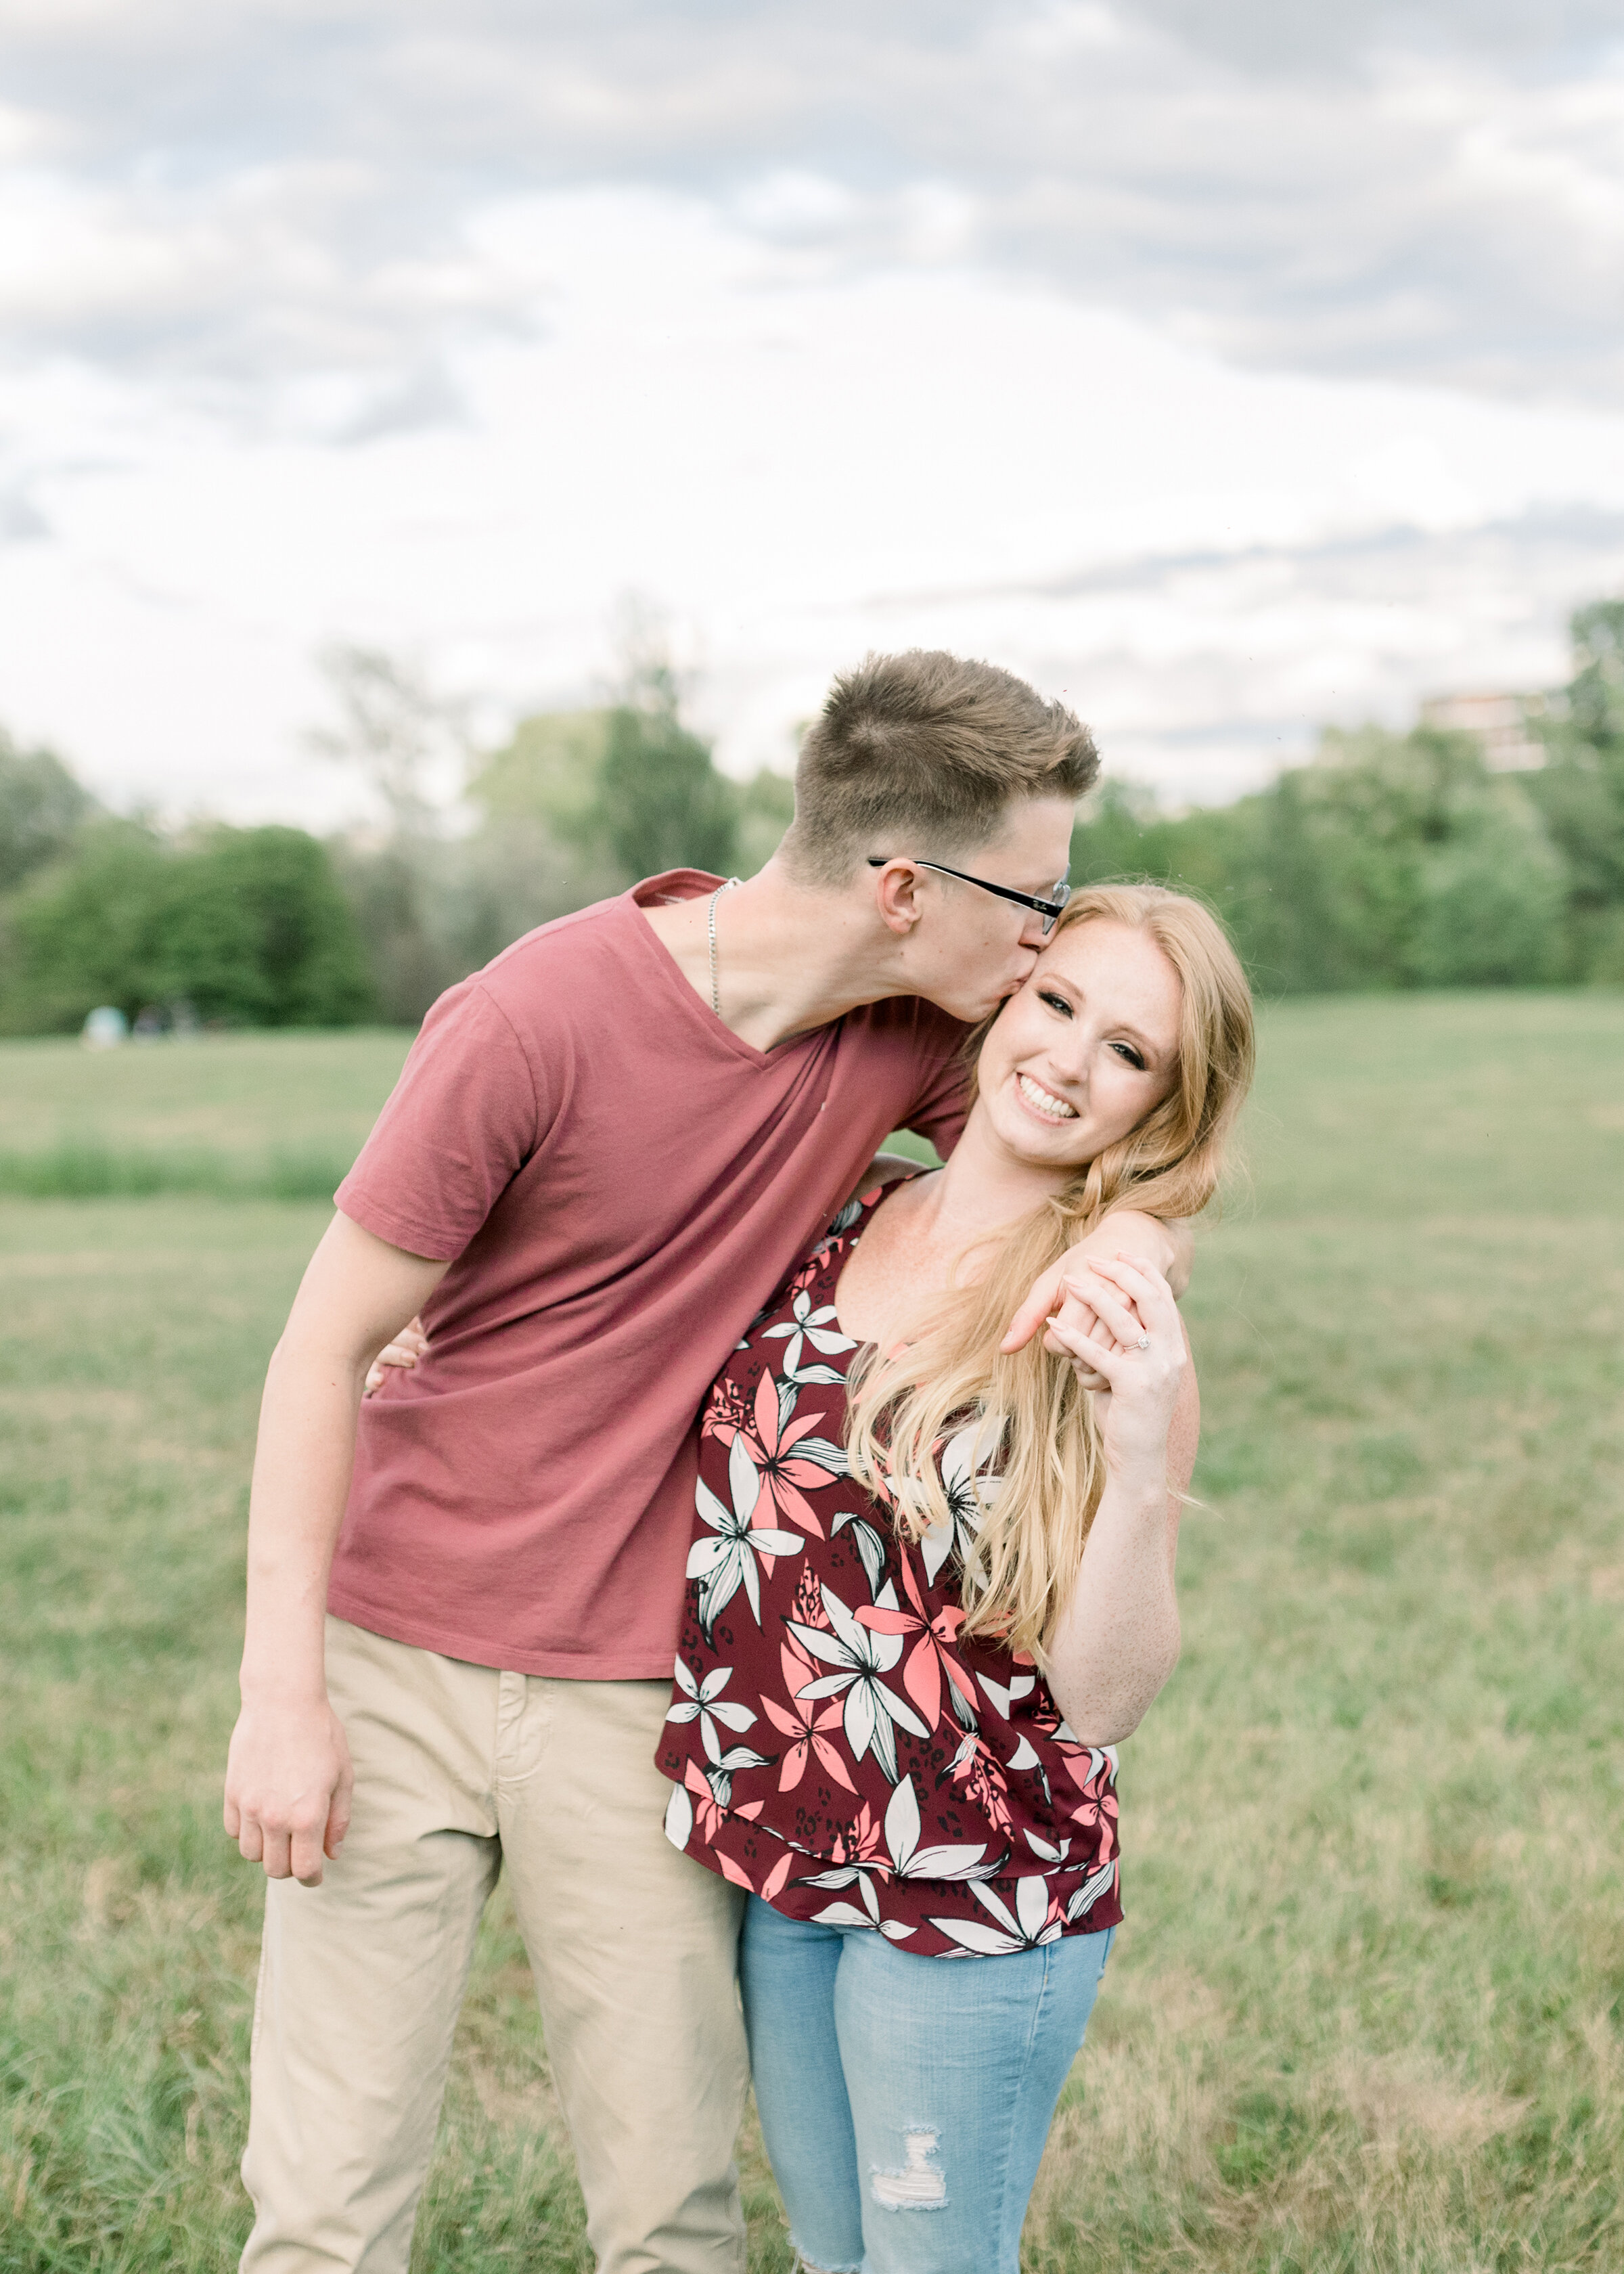  A soon to be groom kisses his fiancé on the cheek as she smiles at the camera in an engagement styled photo shoot in Dominion Arboretum, Ottawa. Casual engagement session attire for women casual attire for men  client attire inspiration engagement s